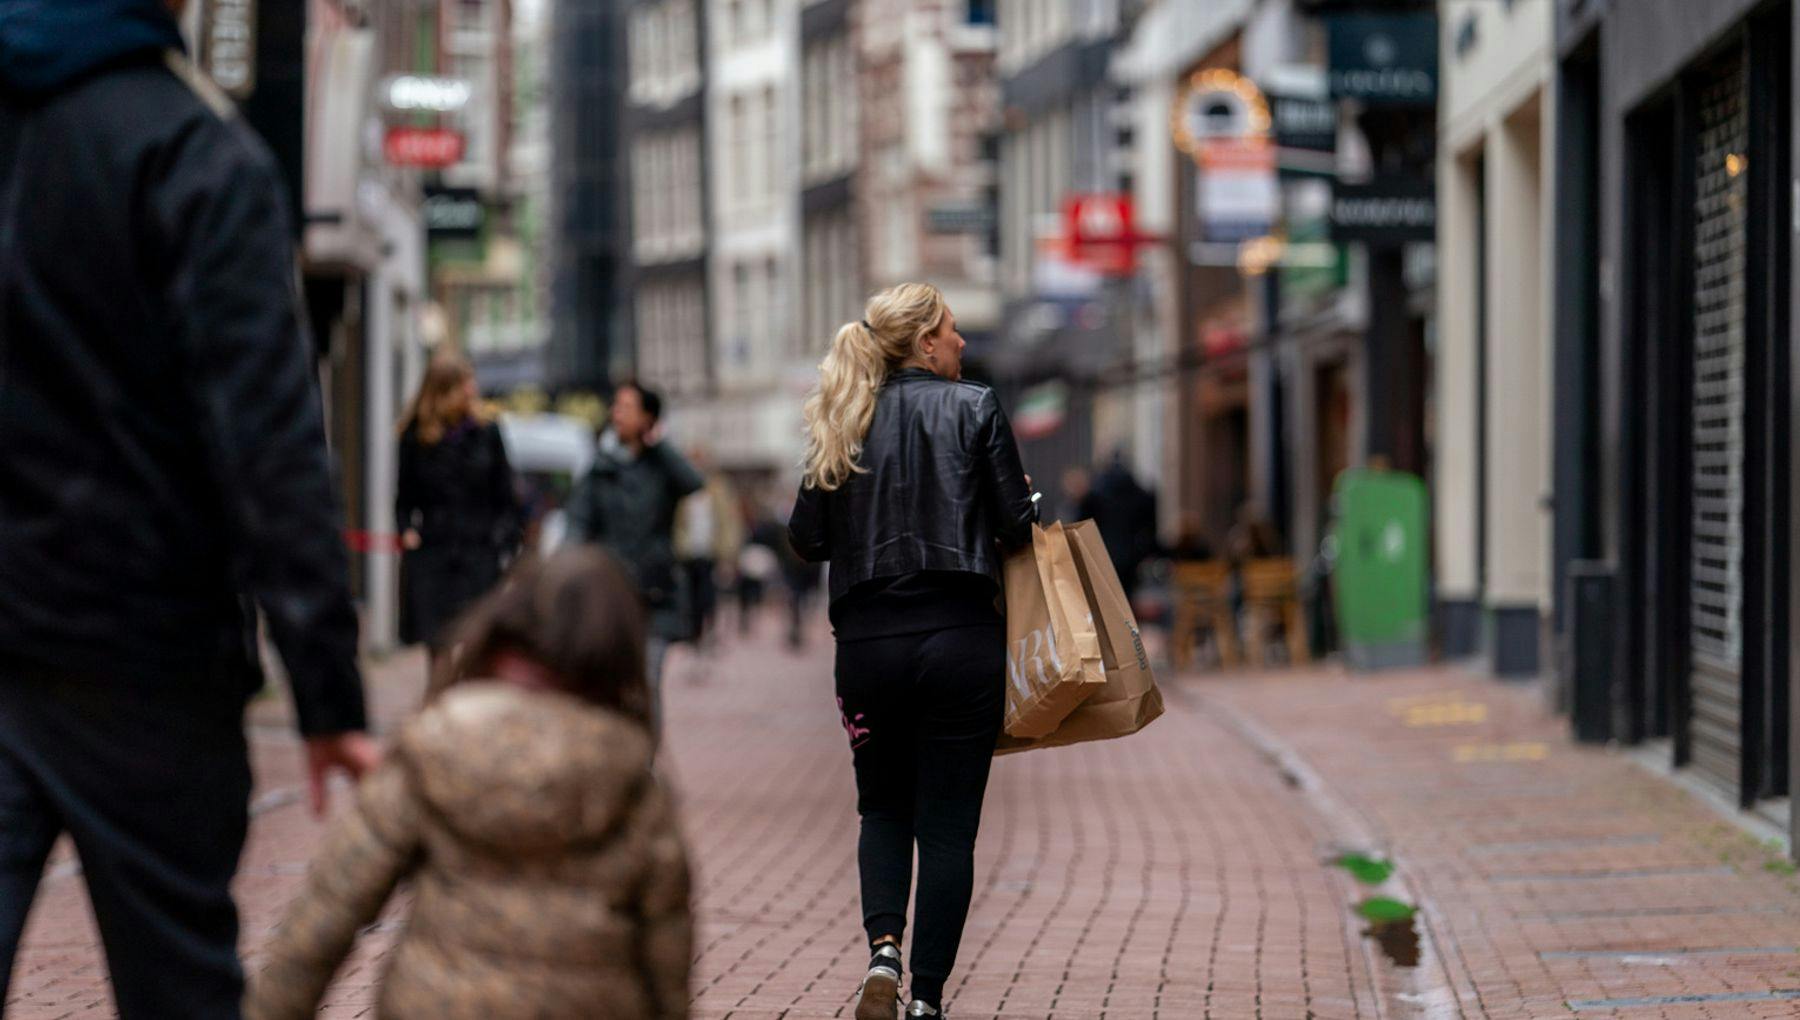 People shopping at Kalverstraat. These pictures can be used by editors at amsterdam&partners at royalty free basis.